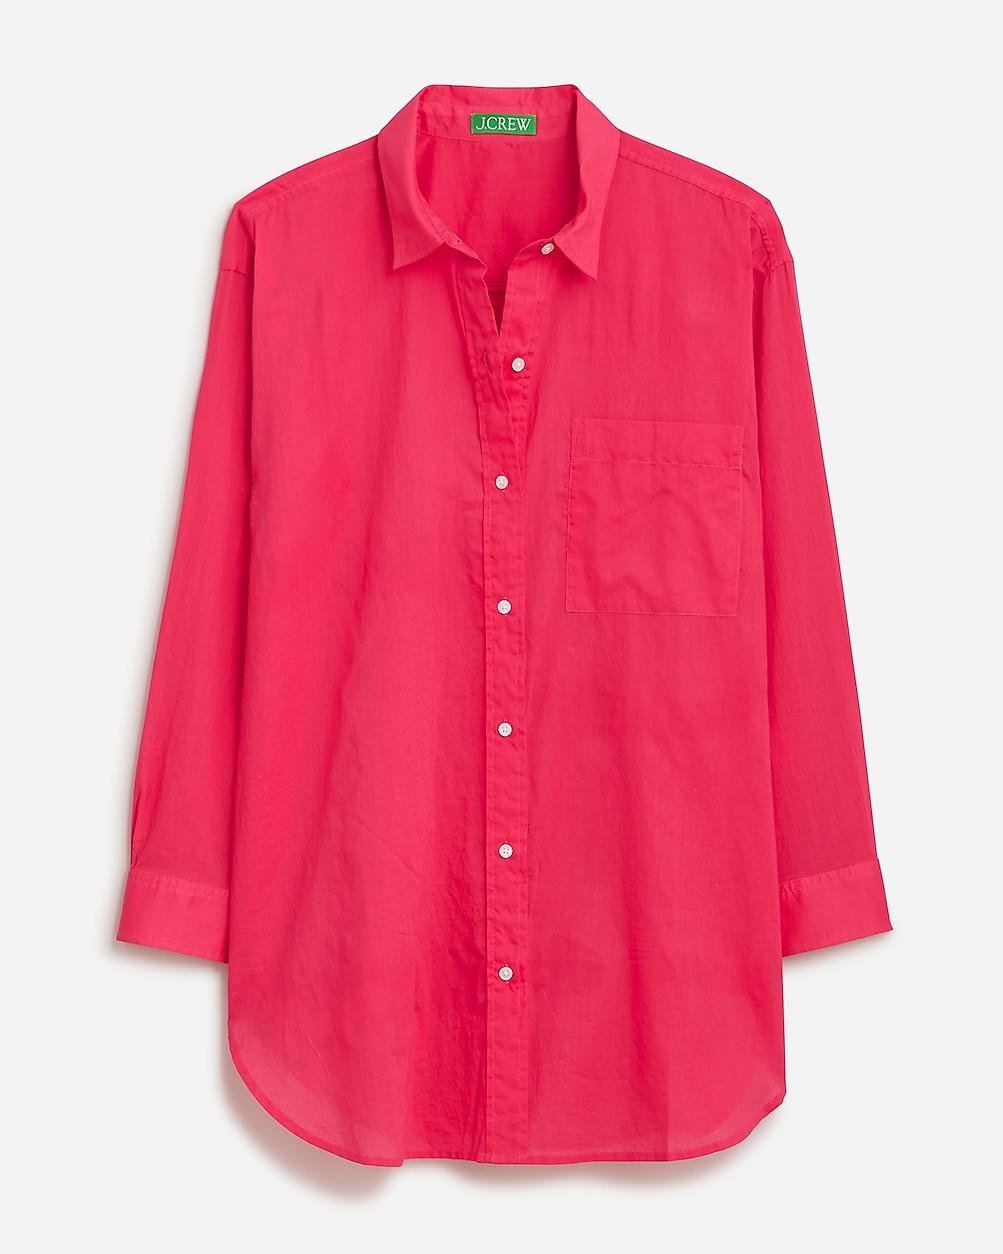 Button-up cotton voile shirt by J.CREW